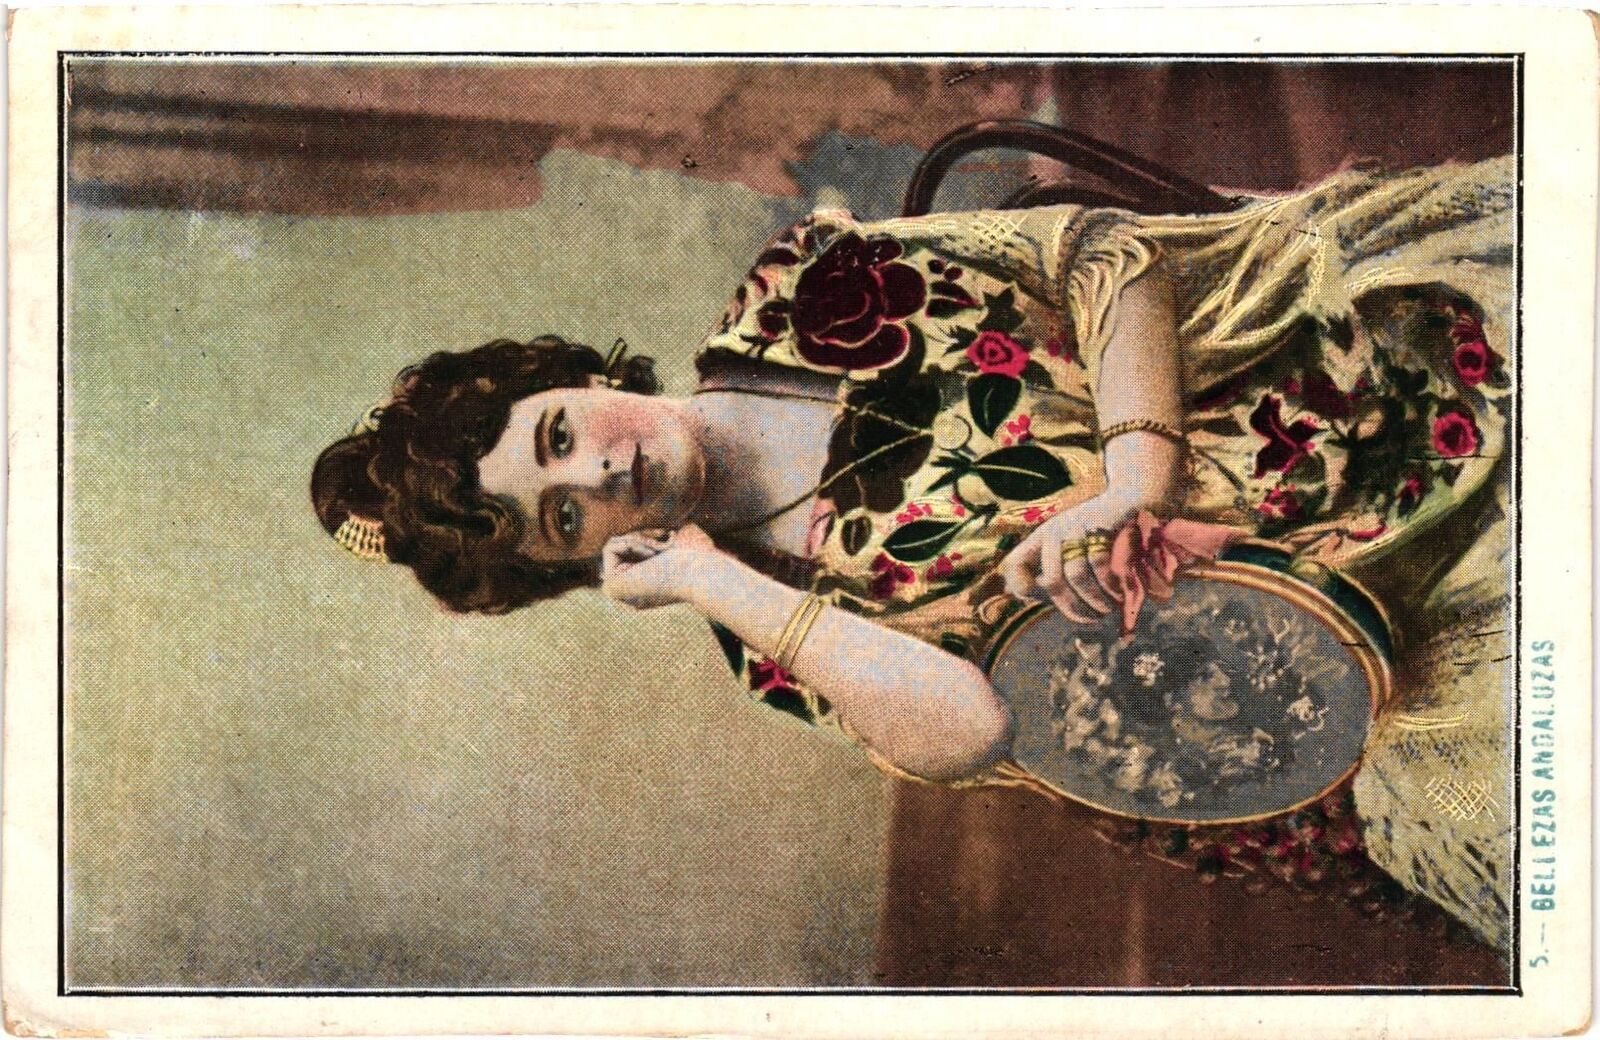 Vintage Postcard- A woman sitting Early 1900s